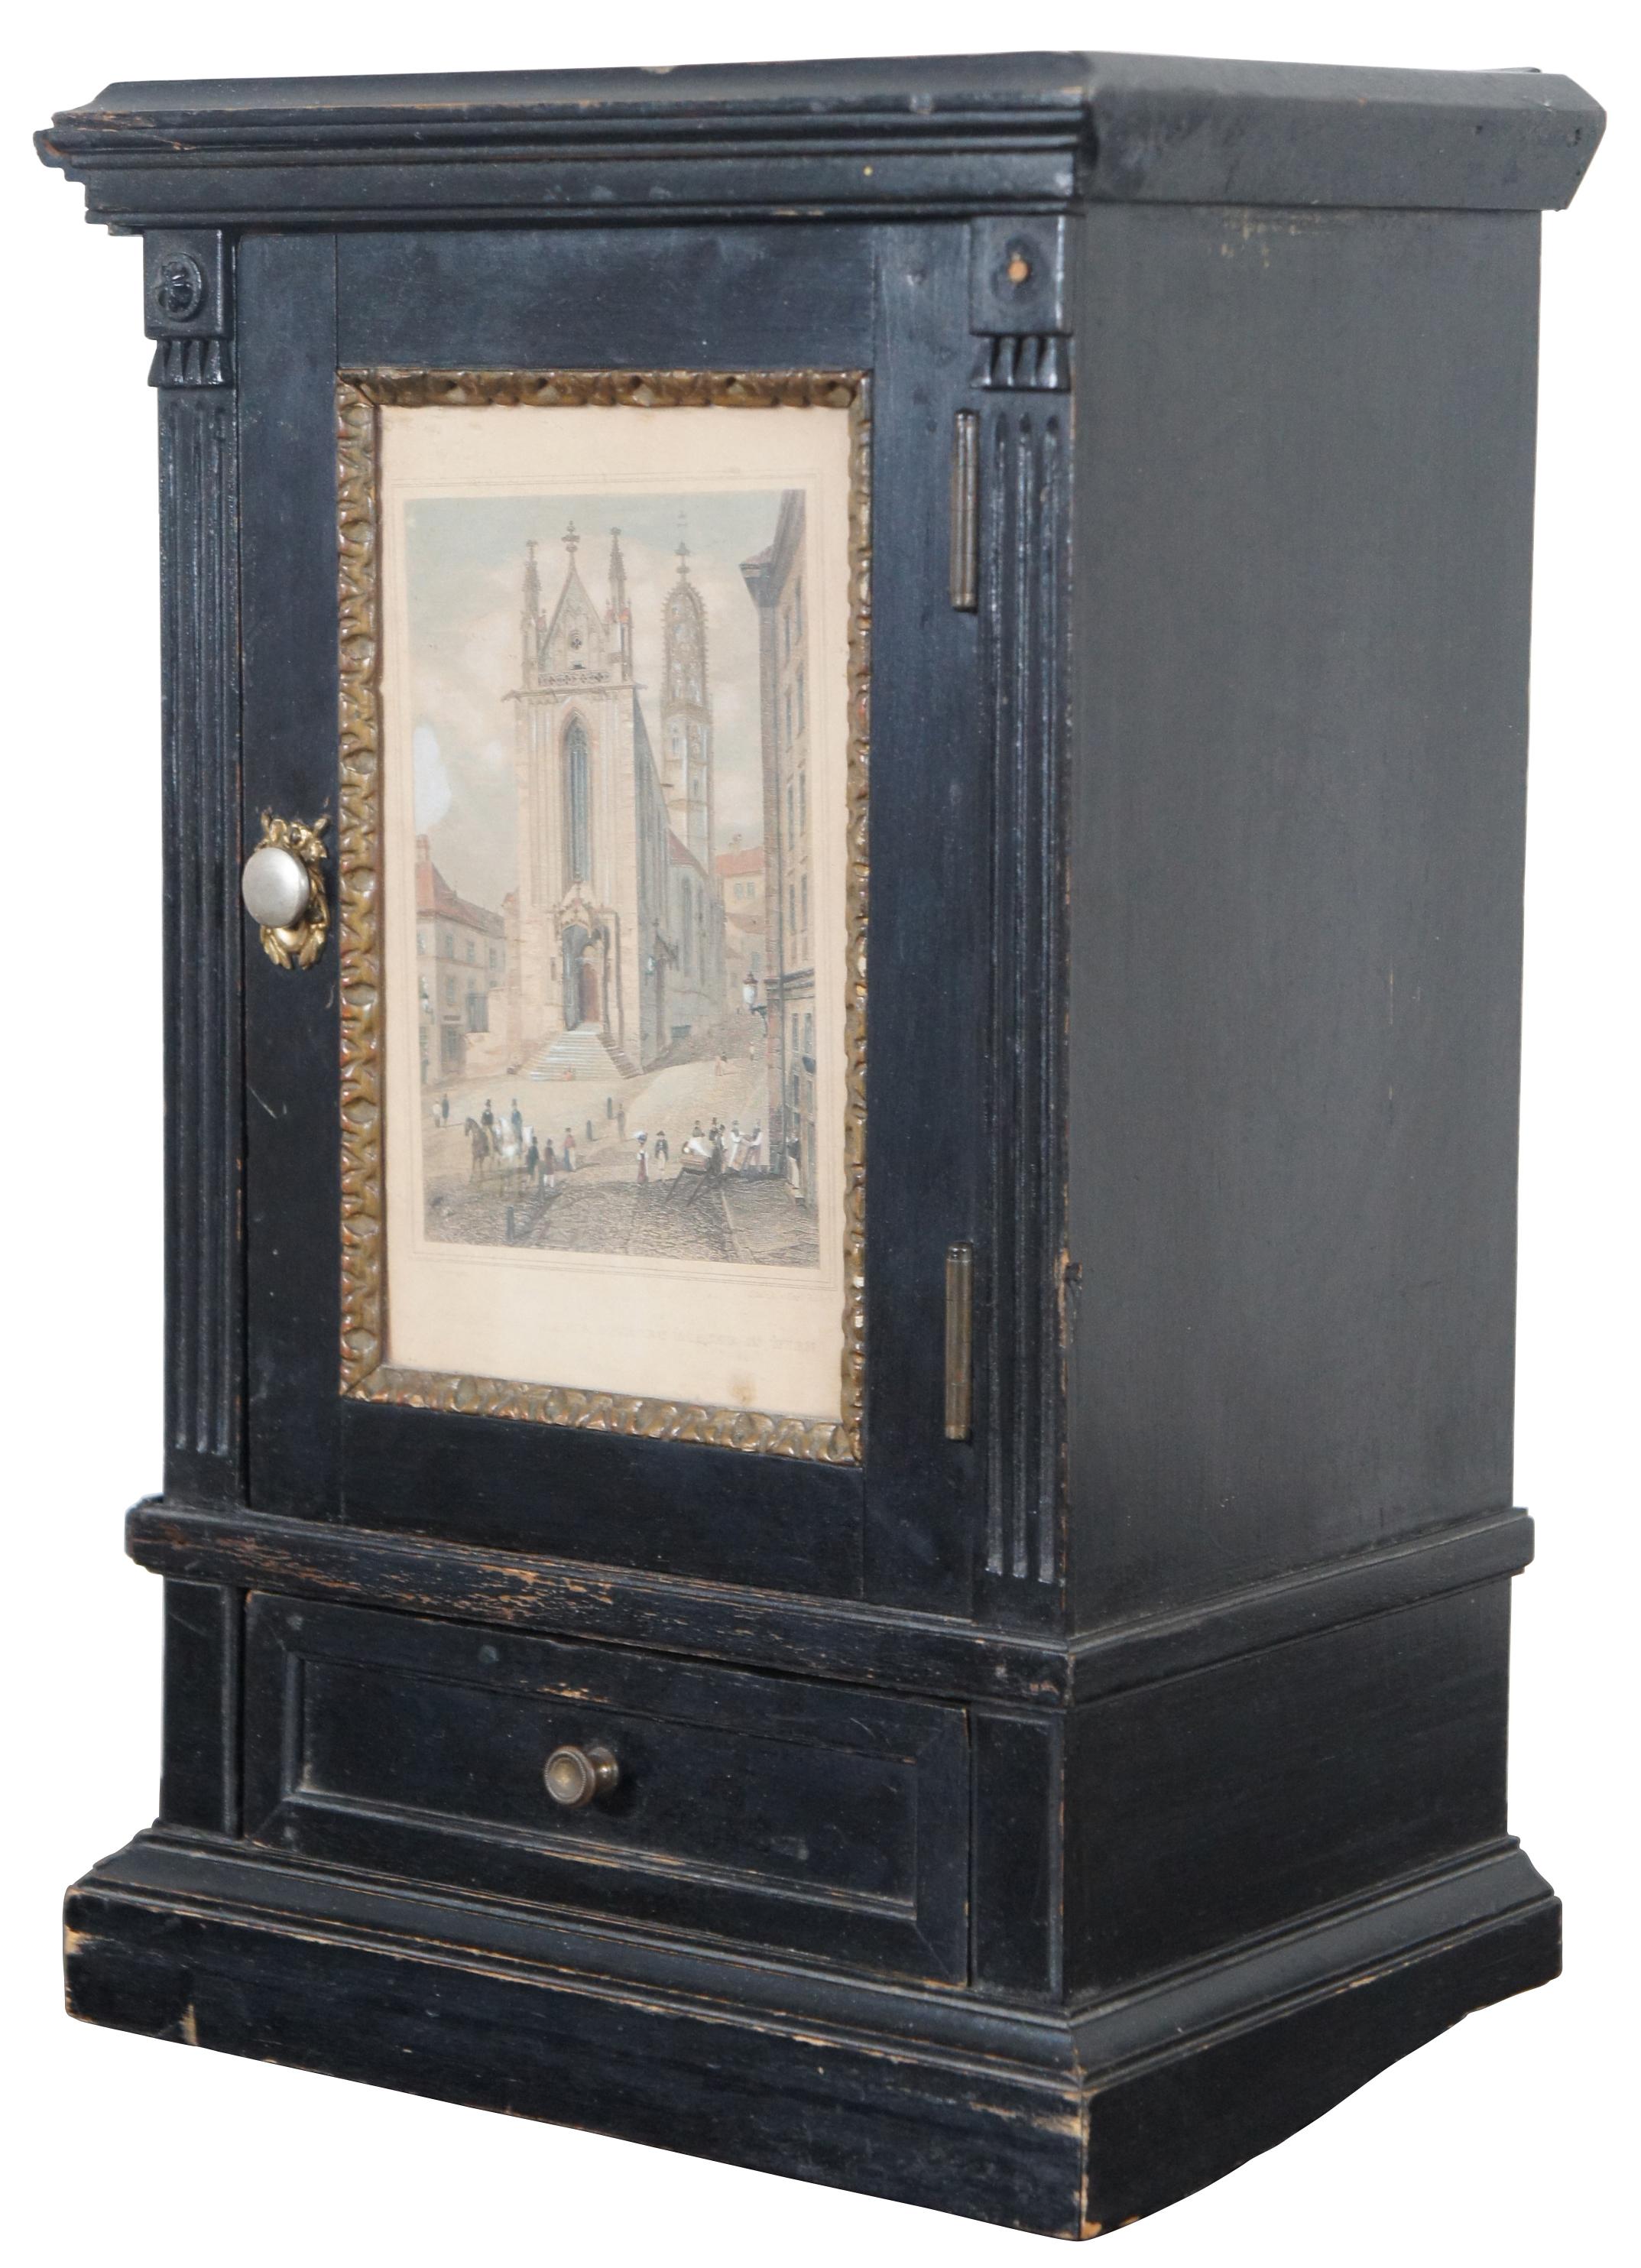 Antique black painted miniature cabinet with lower drawer, three interior shelves and door displaying an antique print by Carl Rauch titled Ansicht der Maria Stiegen Kirche in Wien (View of Mary by the Shore Church in Vienna). “Maria am Gestade or